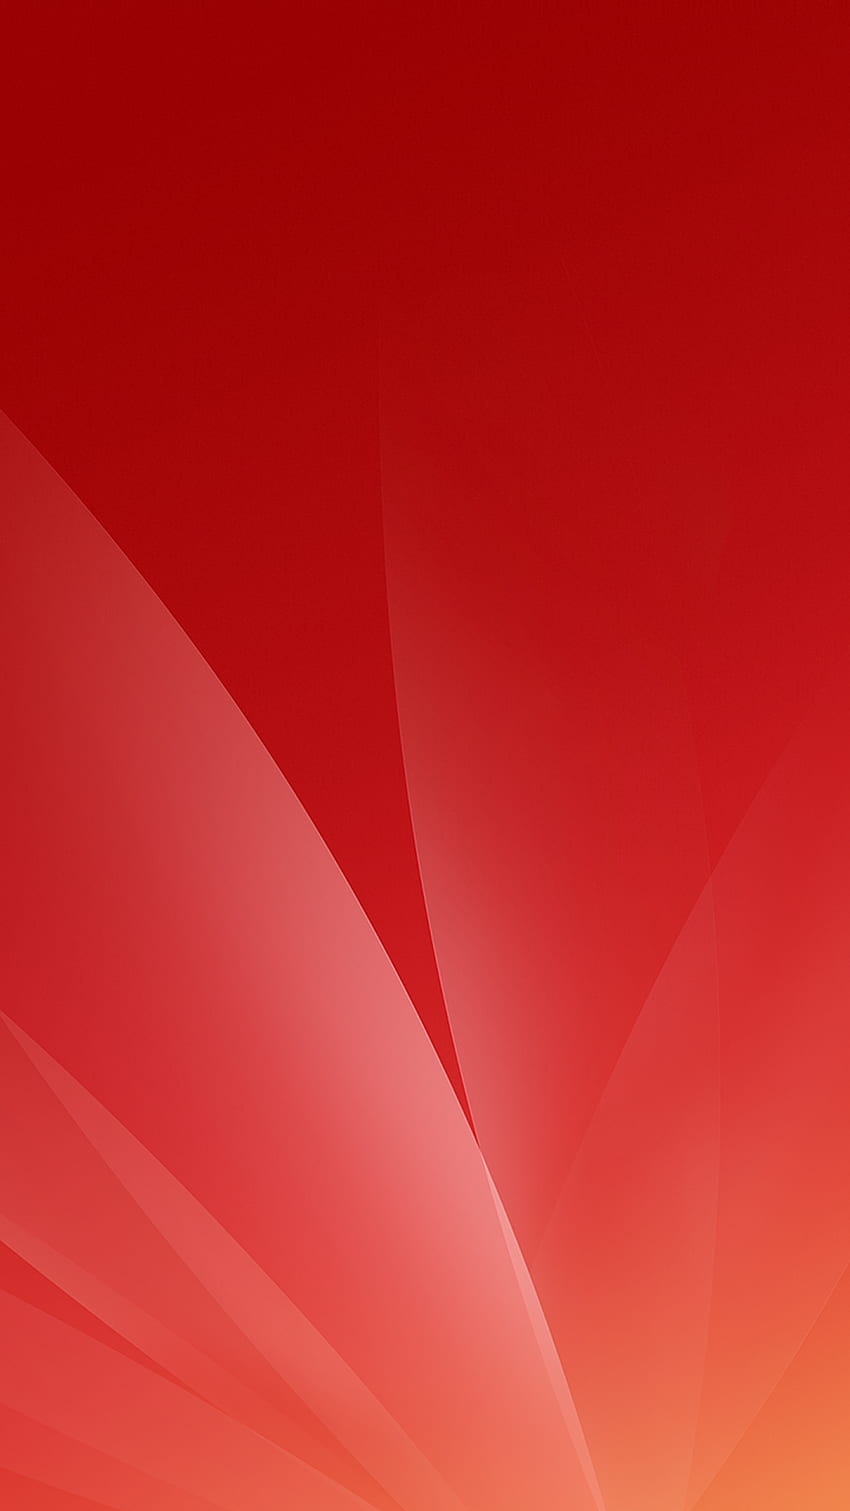 ZTE Nubia ZS Stock Full . Phone design, Live iphone, Background phone, Full Red HD phone wallpaper